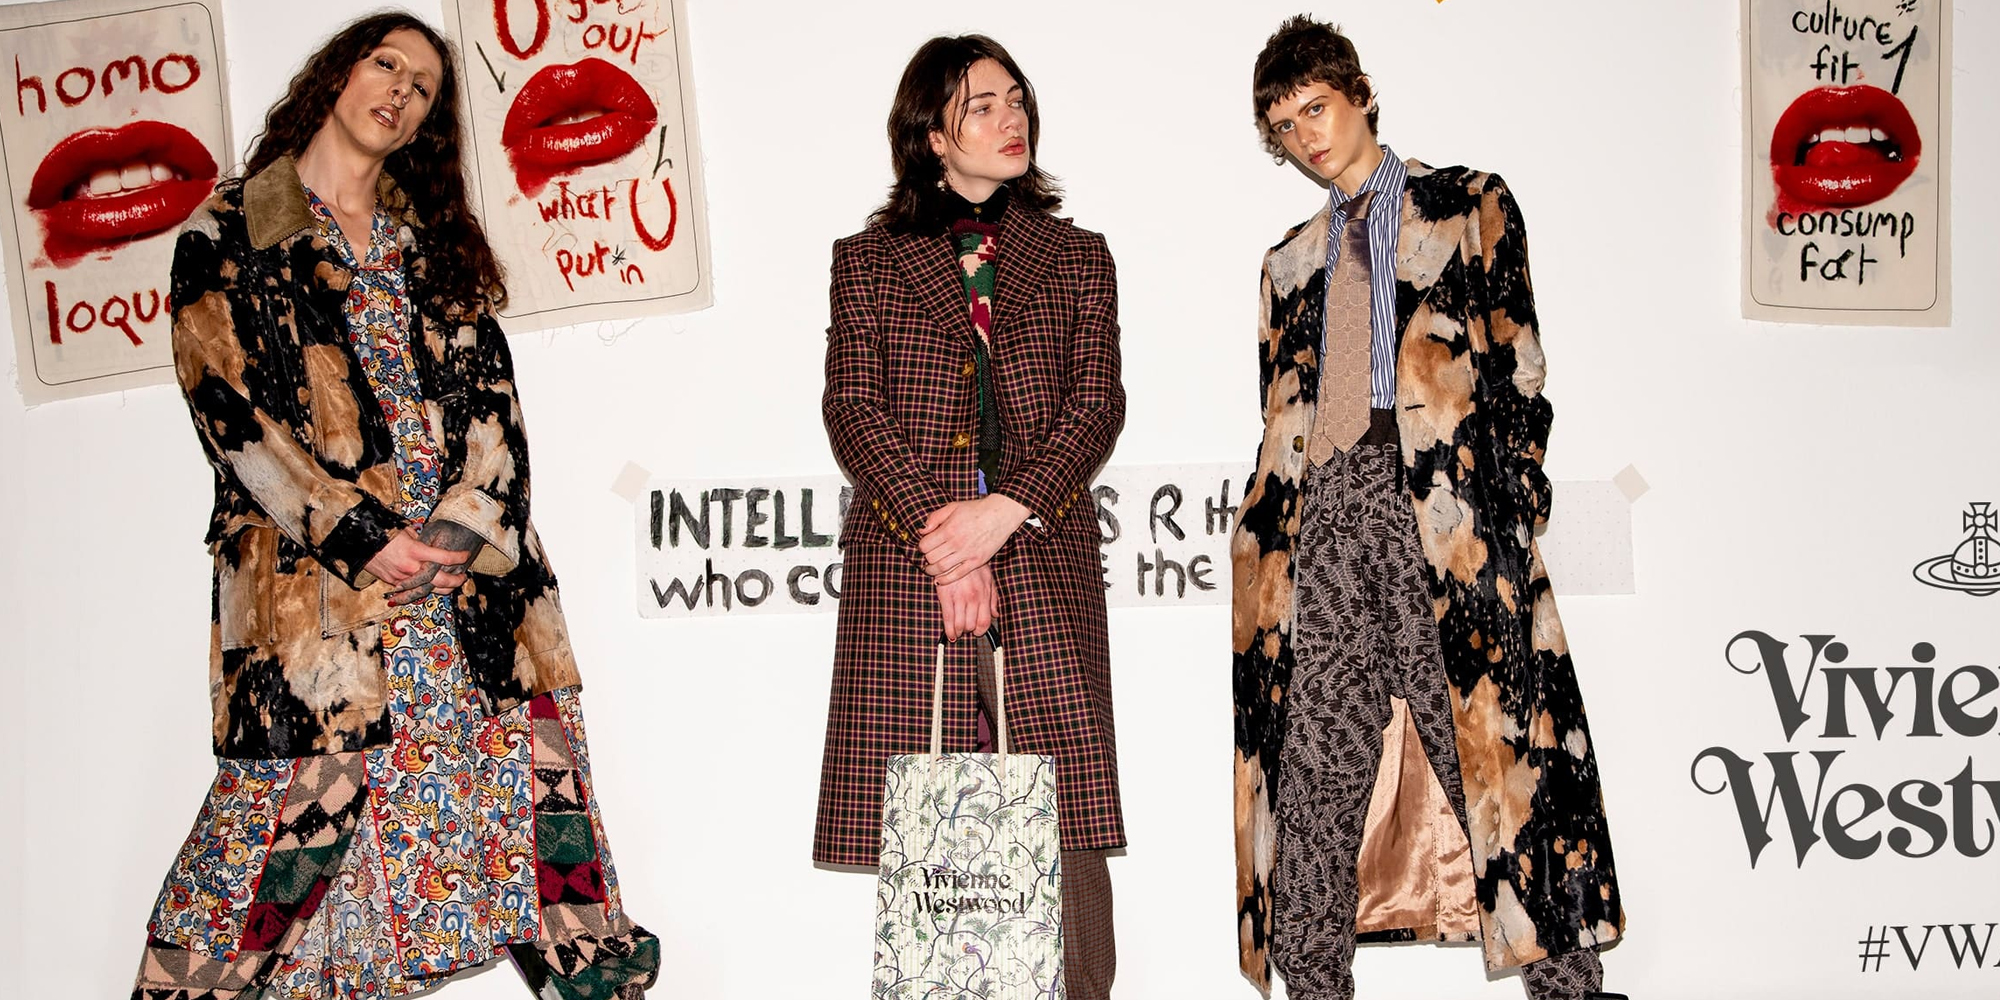 WATCH THE VIVIENNE WESTWOOD FALL 2022 RTW RUNWAY SHOW LIVE